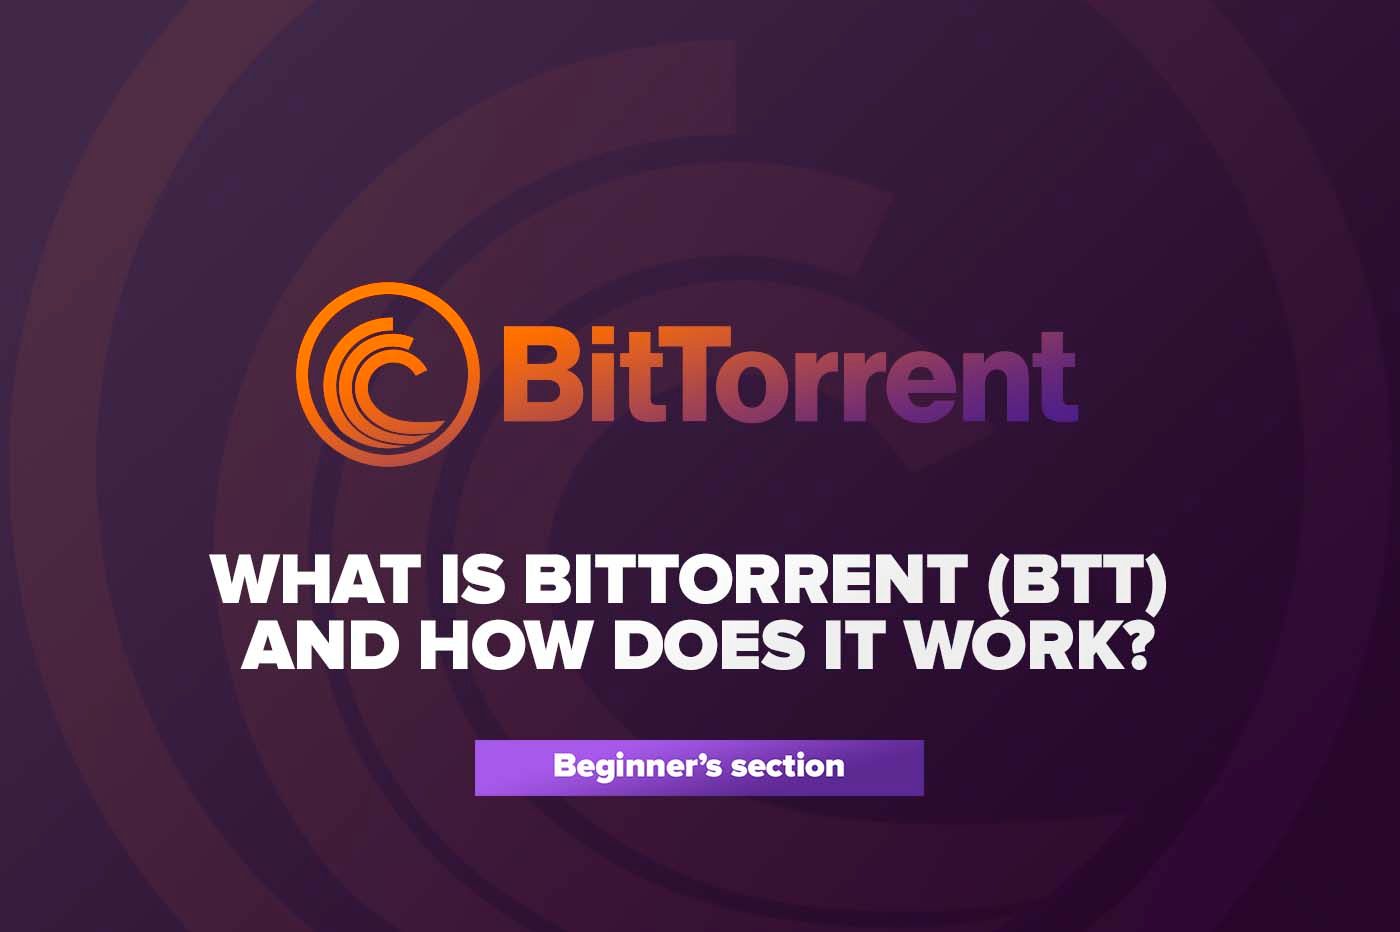 Article What Is BitTorrent (BTT) and How Does It Work?